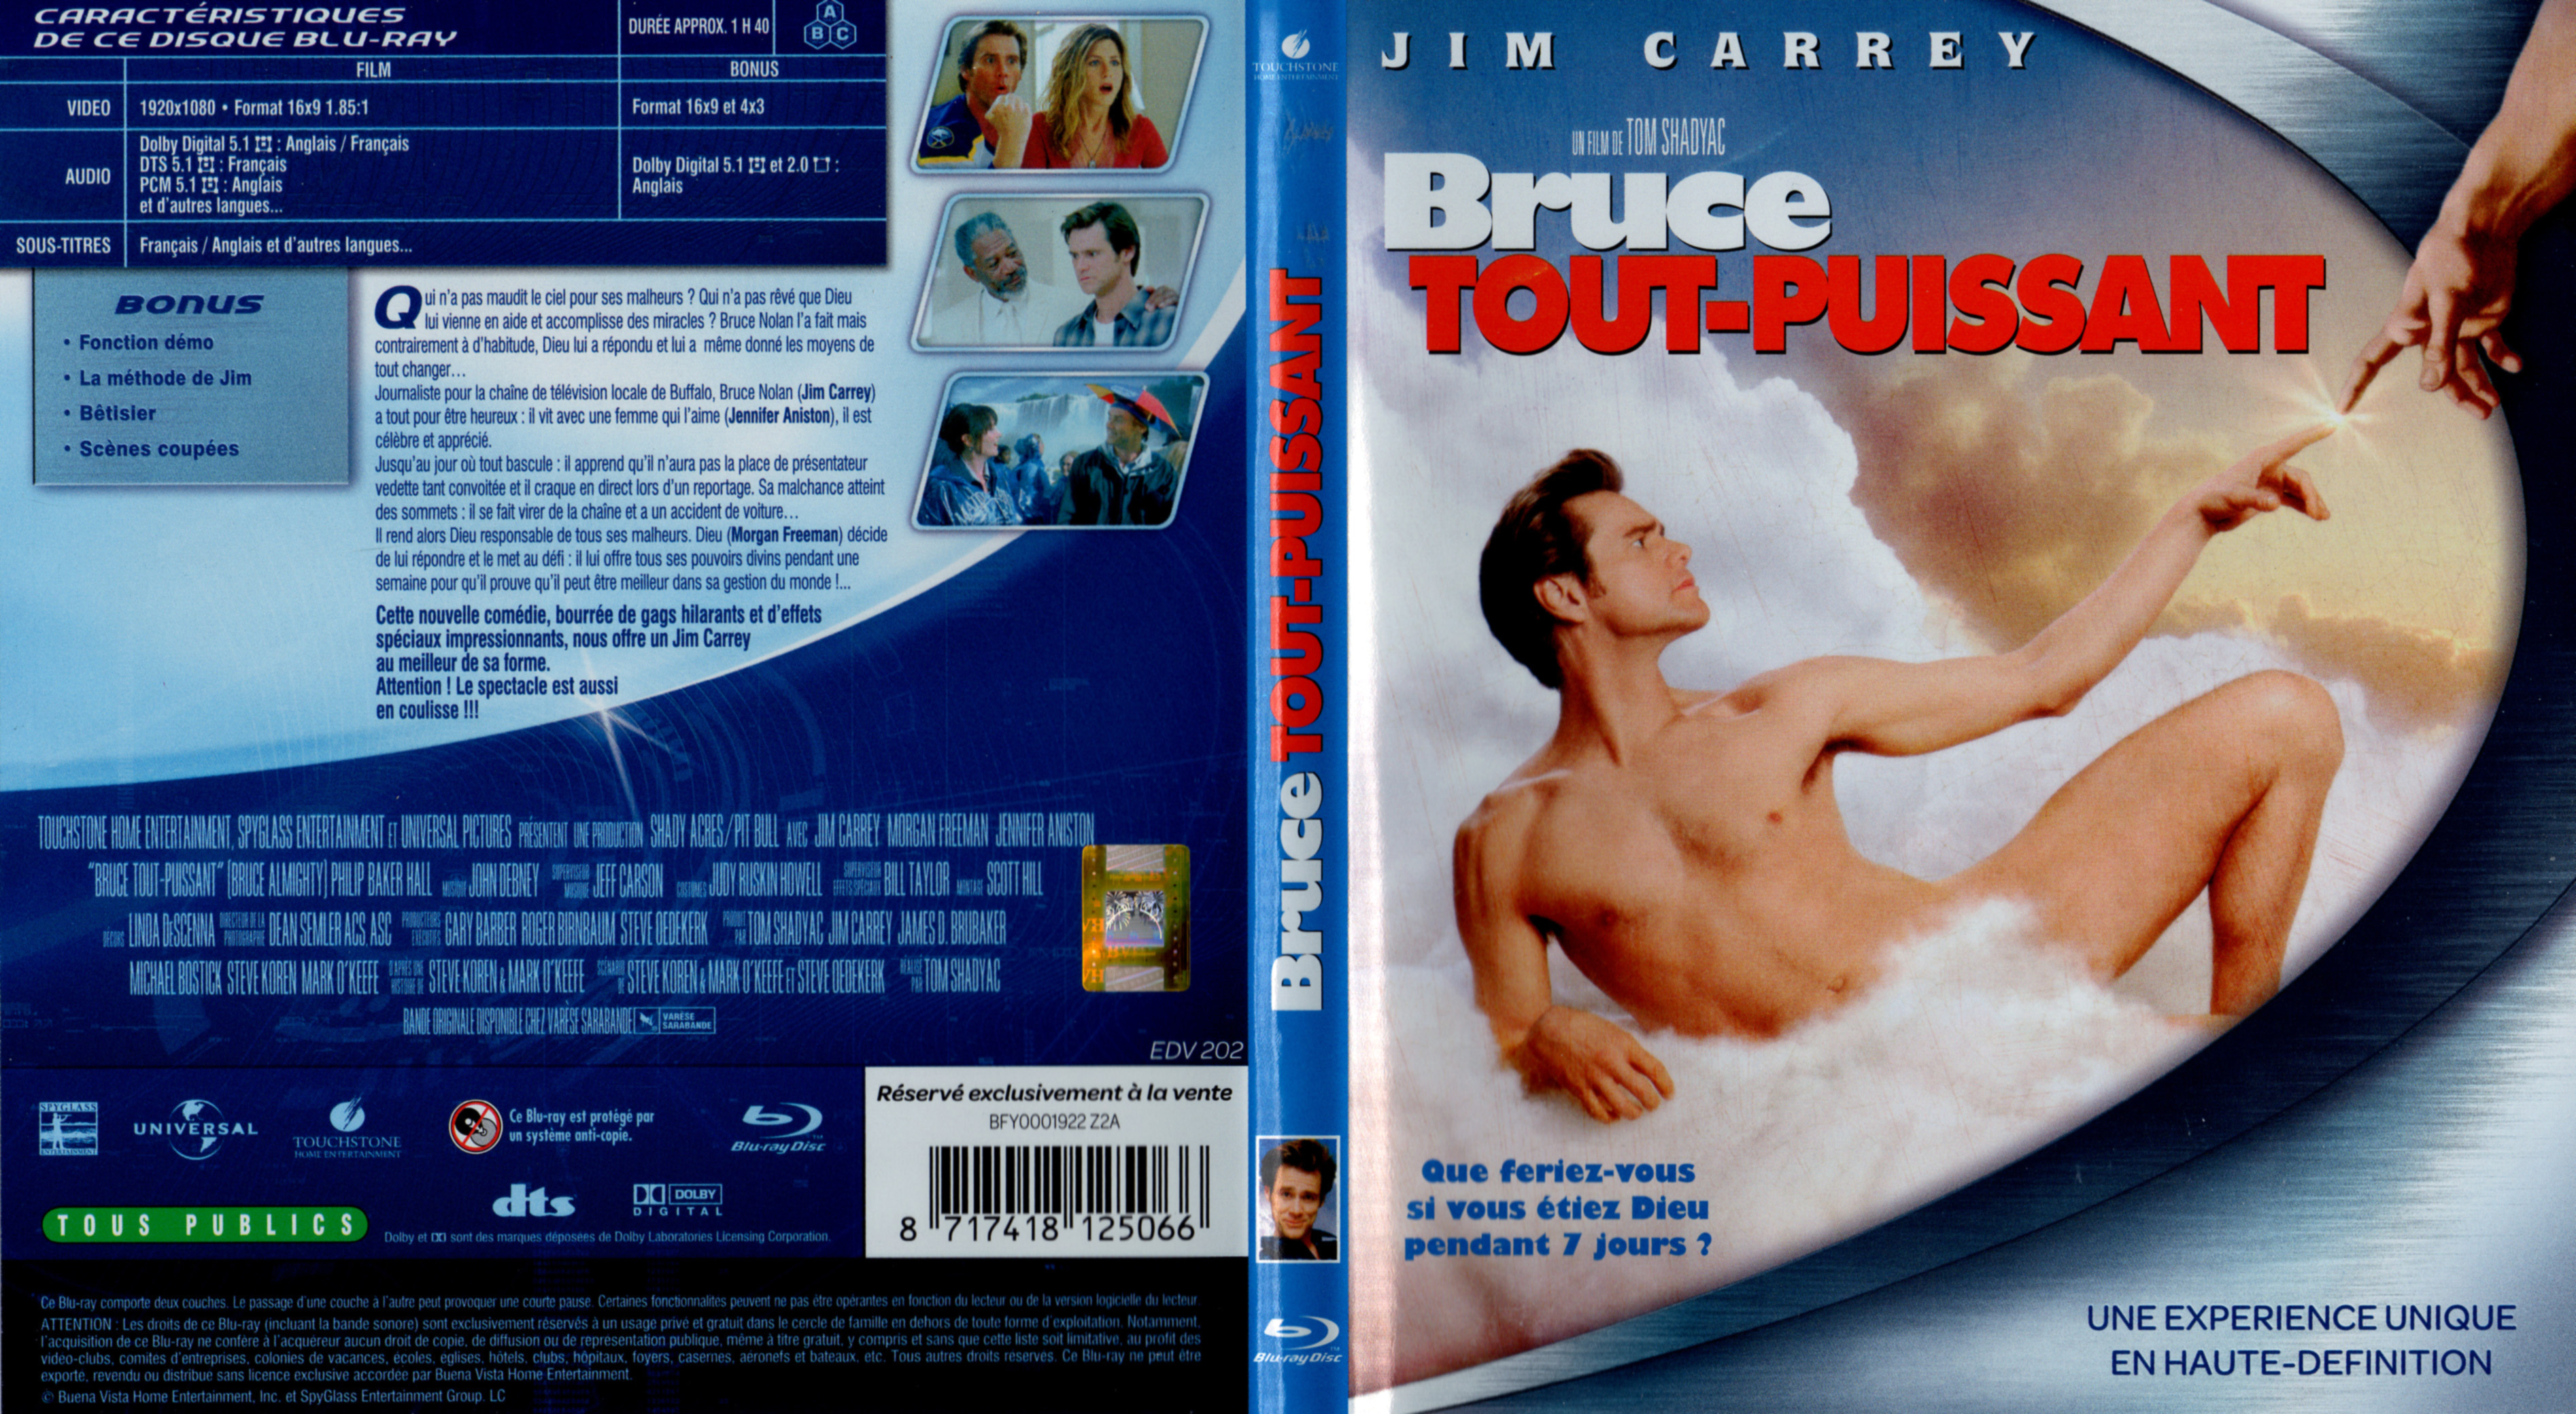 Jaquette DVD Bruce tout puissant (BLU-RAY)